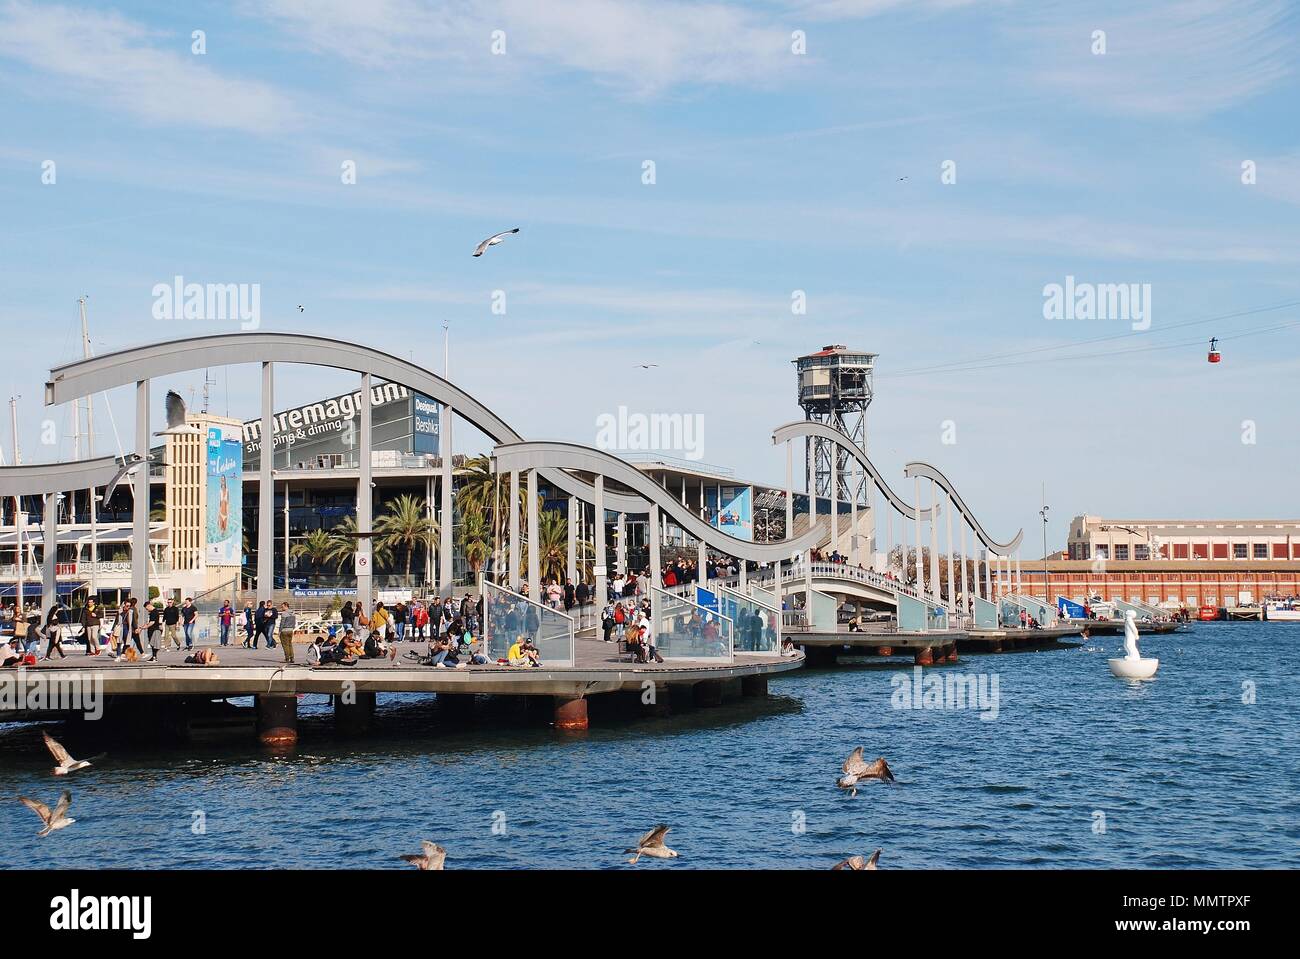 The Rambla del Mar floating footbridge at Port Vell in Barcelona, Spain on April 15, 2018. The bridge was opened in 1994. Stock Photo